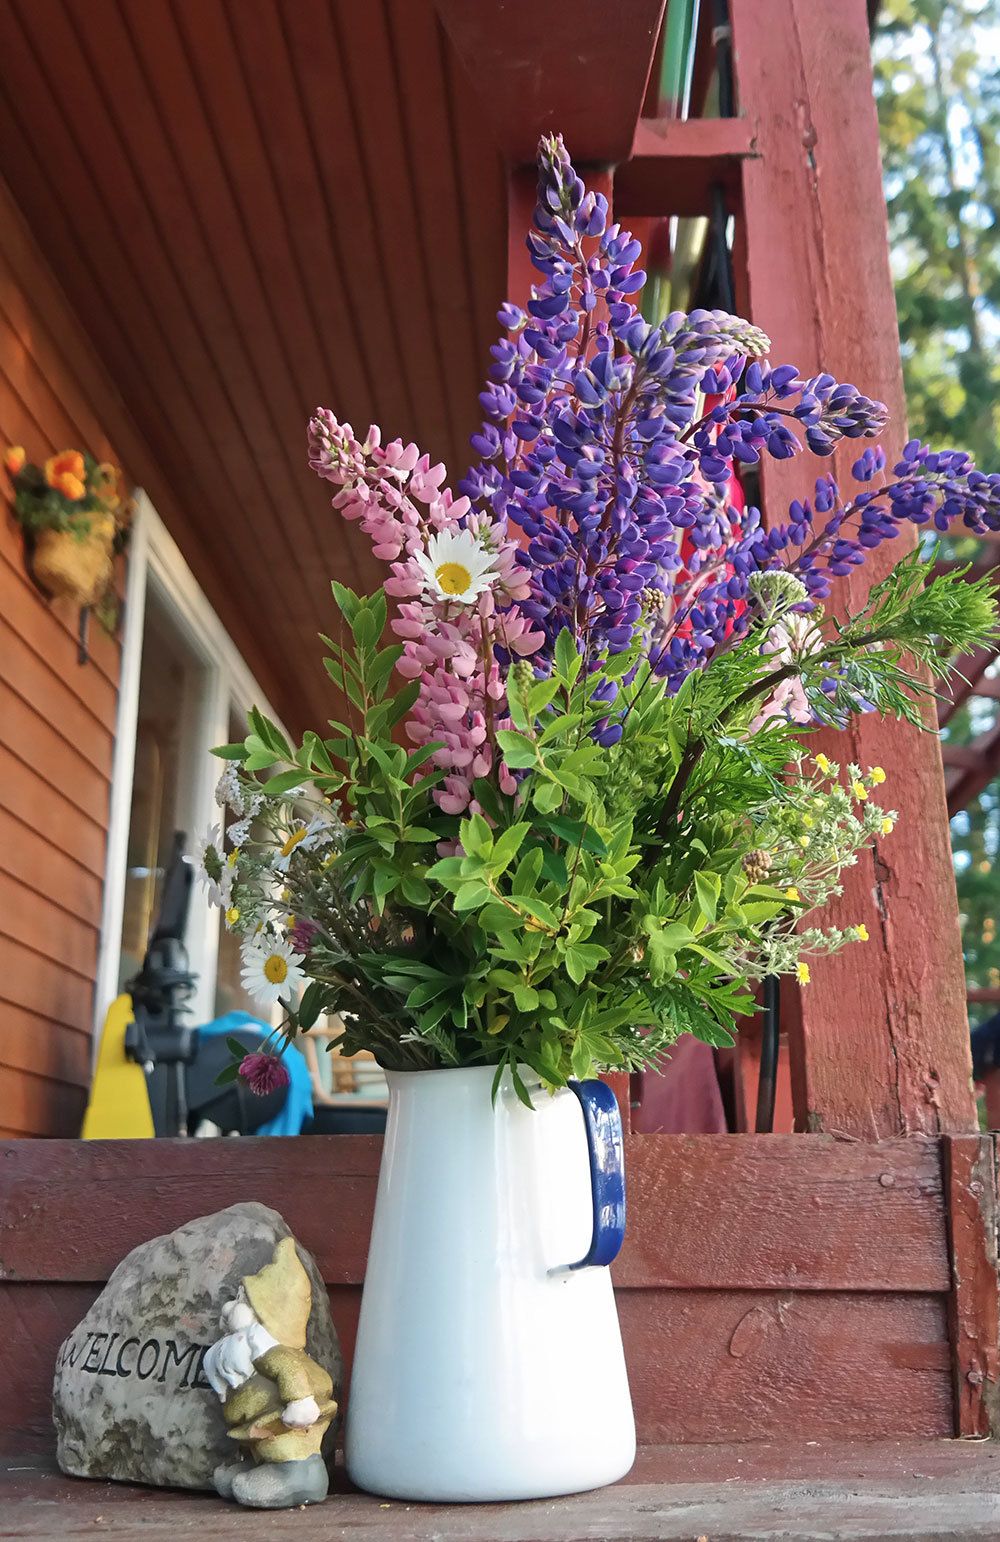 Finnish summer cottage decorating: flowers from the forest. Travel photo by Katja Presnal | @skimbaco